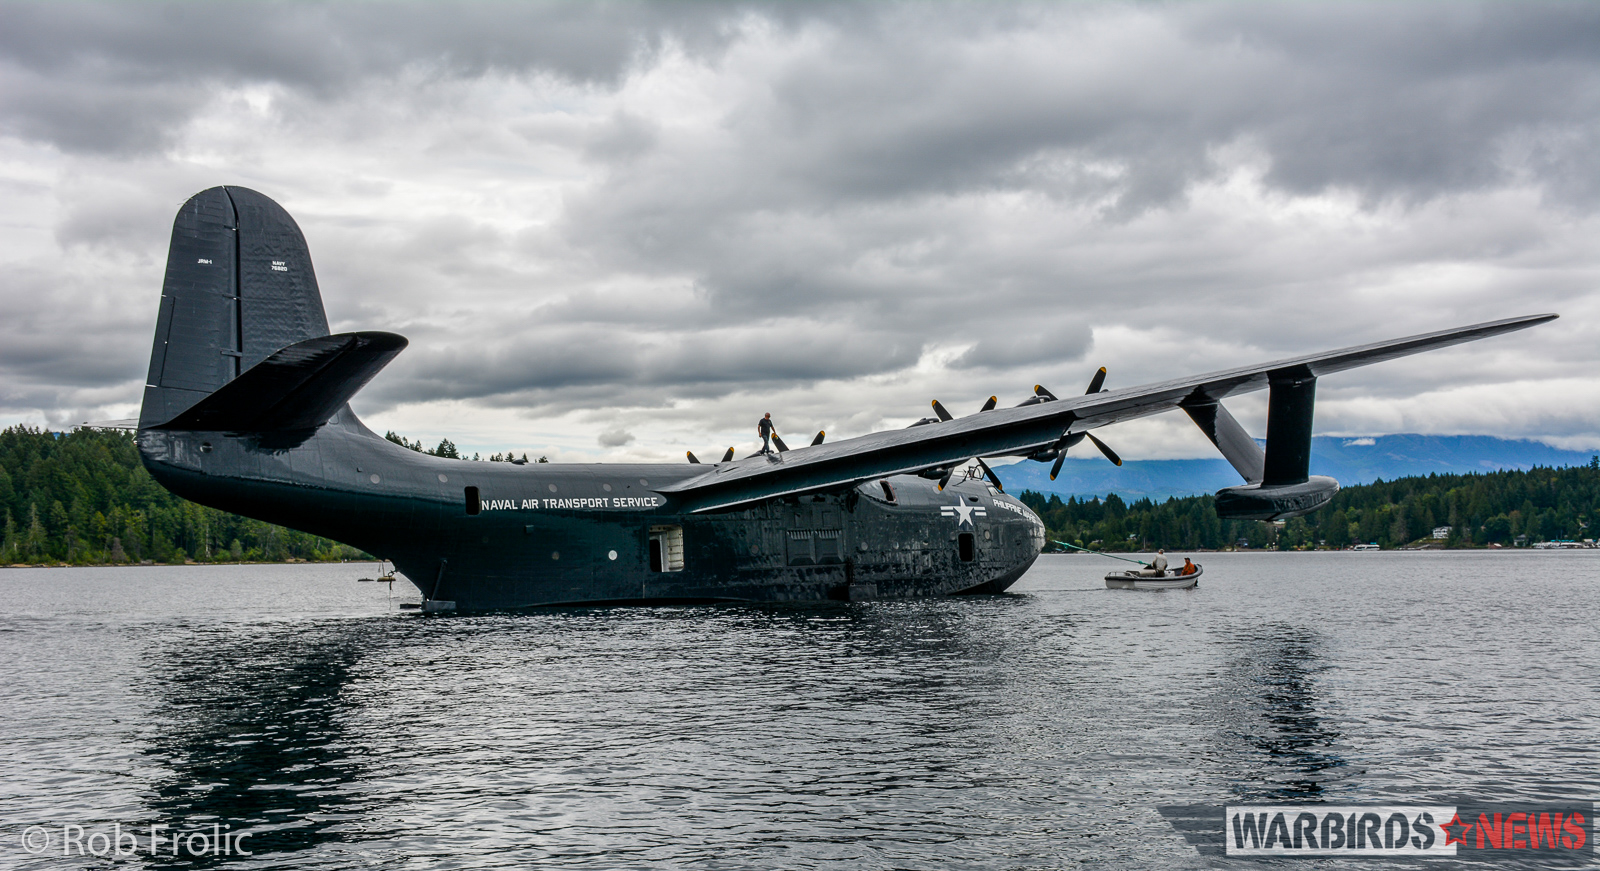 Philippine Mars floating on Sproat Lake for the first time in years. She is nearly airworthy but currently inhibited, awaiting the outcome of a deal to take her to the National Naval Aviation Museum in Pensacola, Florida. (photo by Rob Frolic)